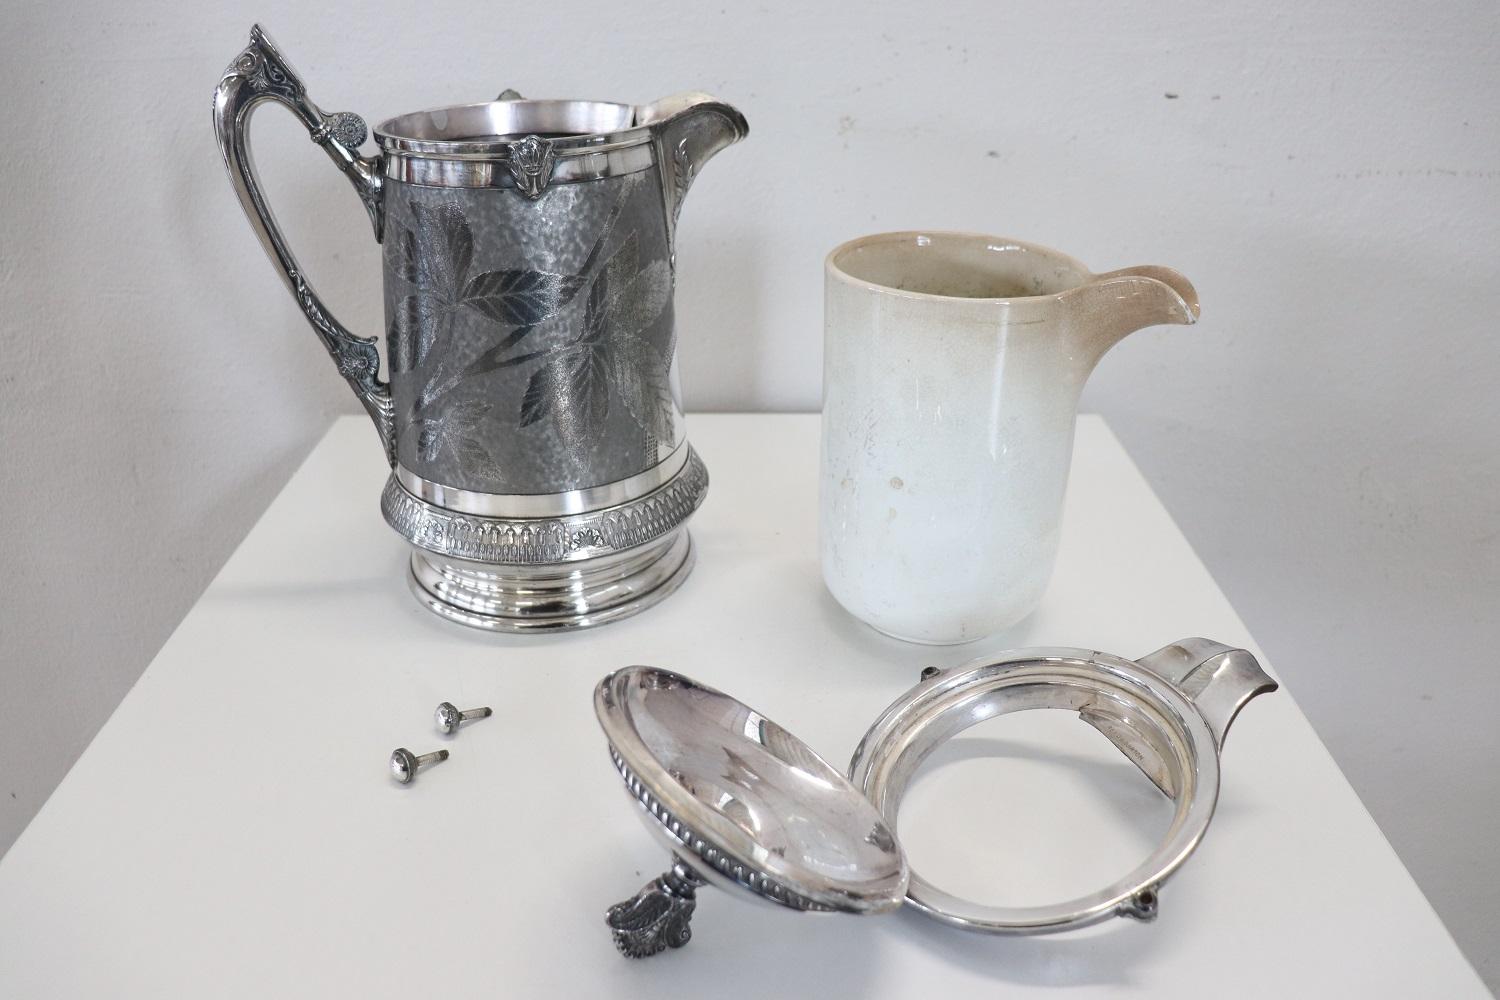 19th Century American Antique Silver Plate Pitcher by Reed & Barton For Sale 4